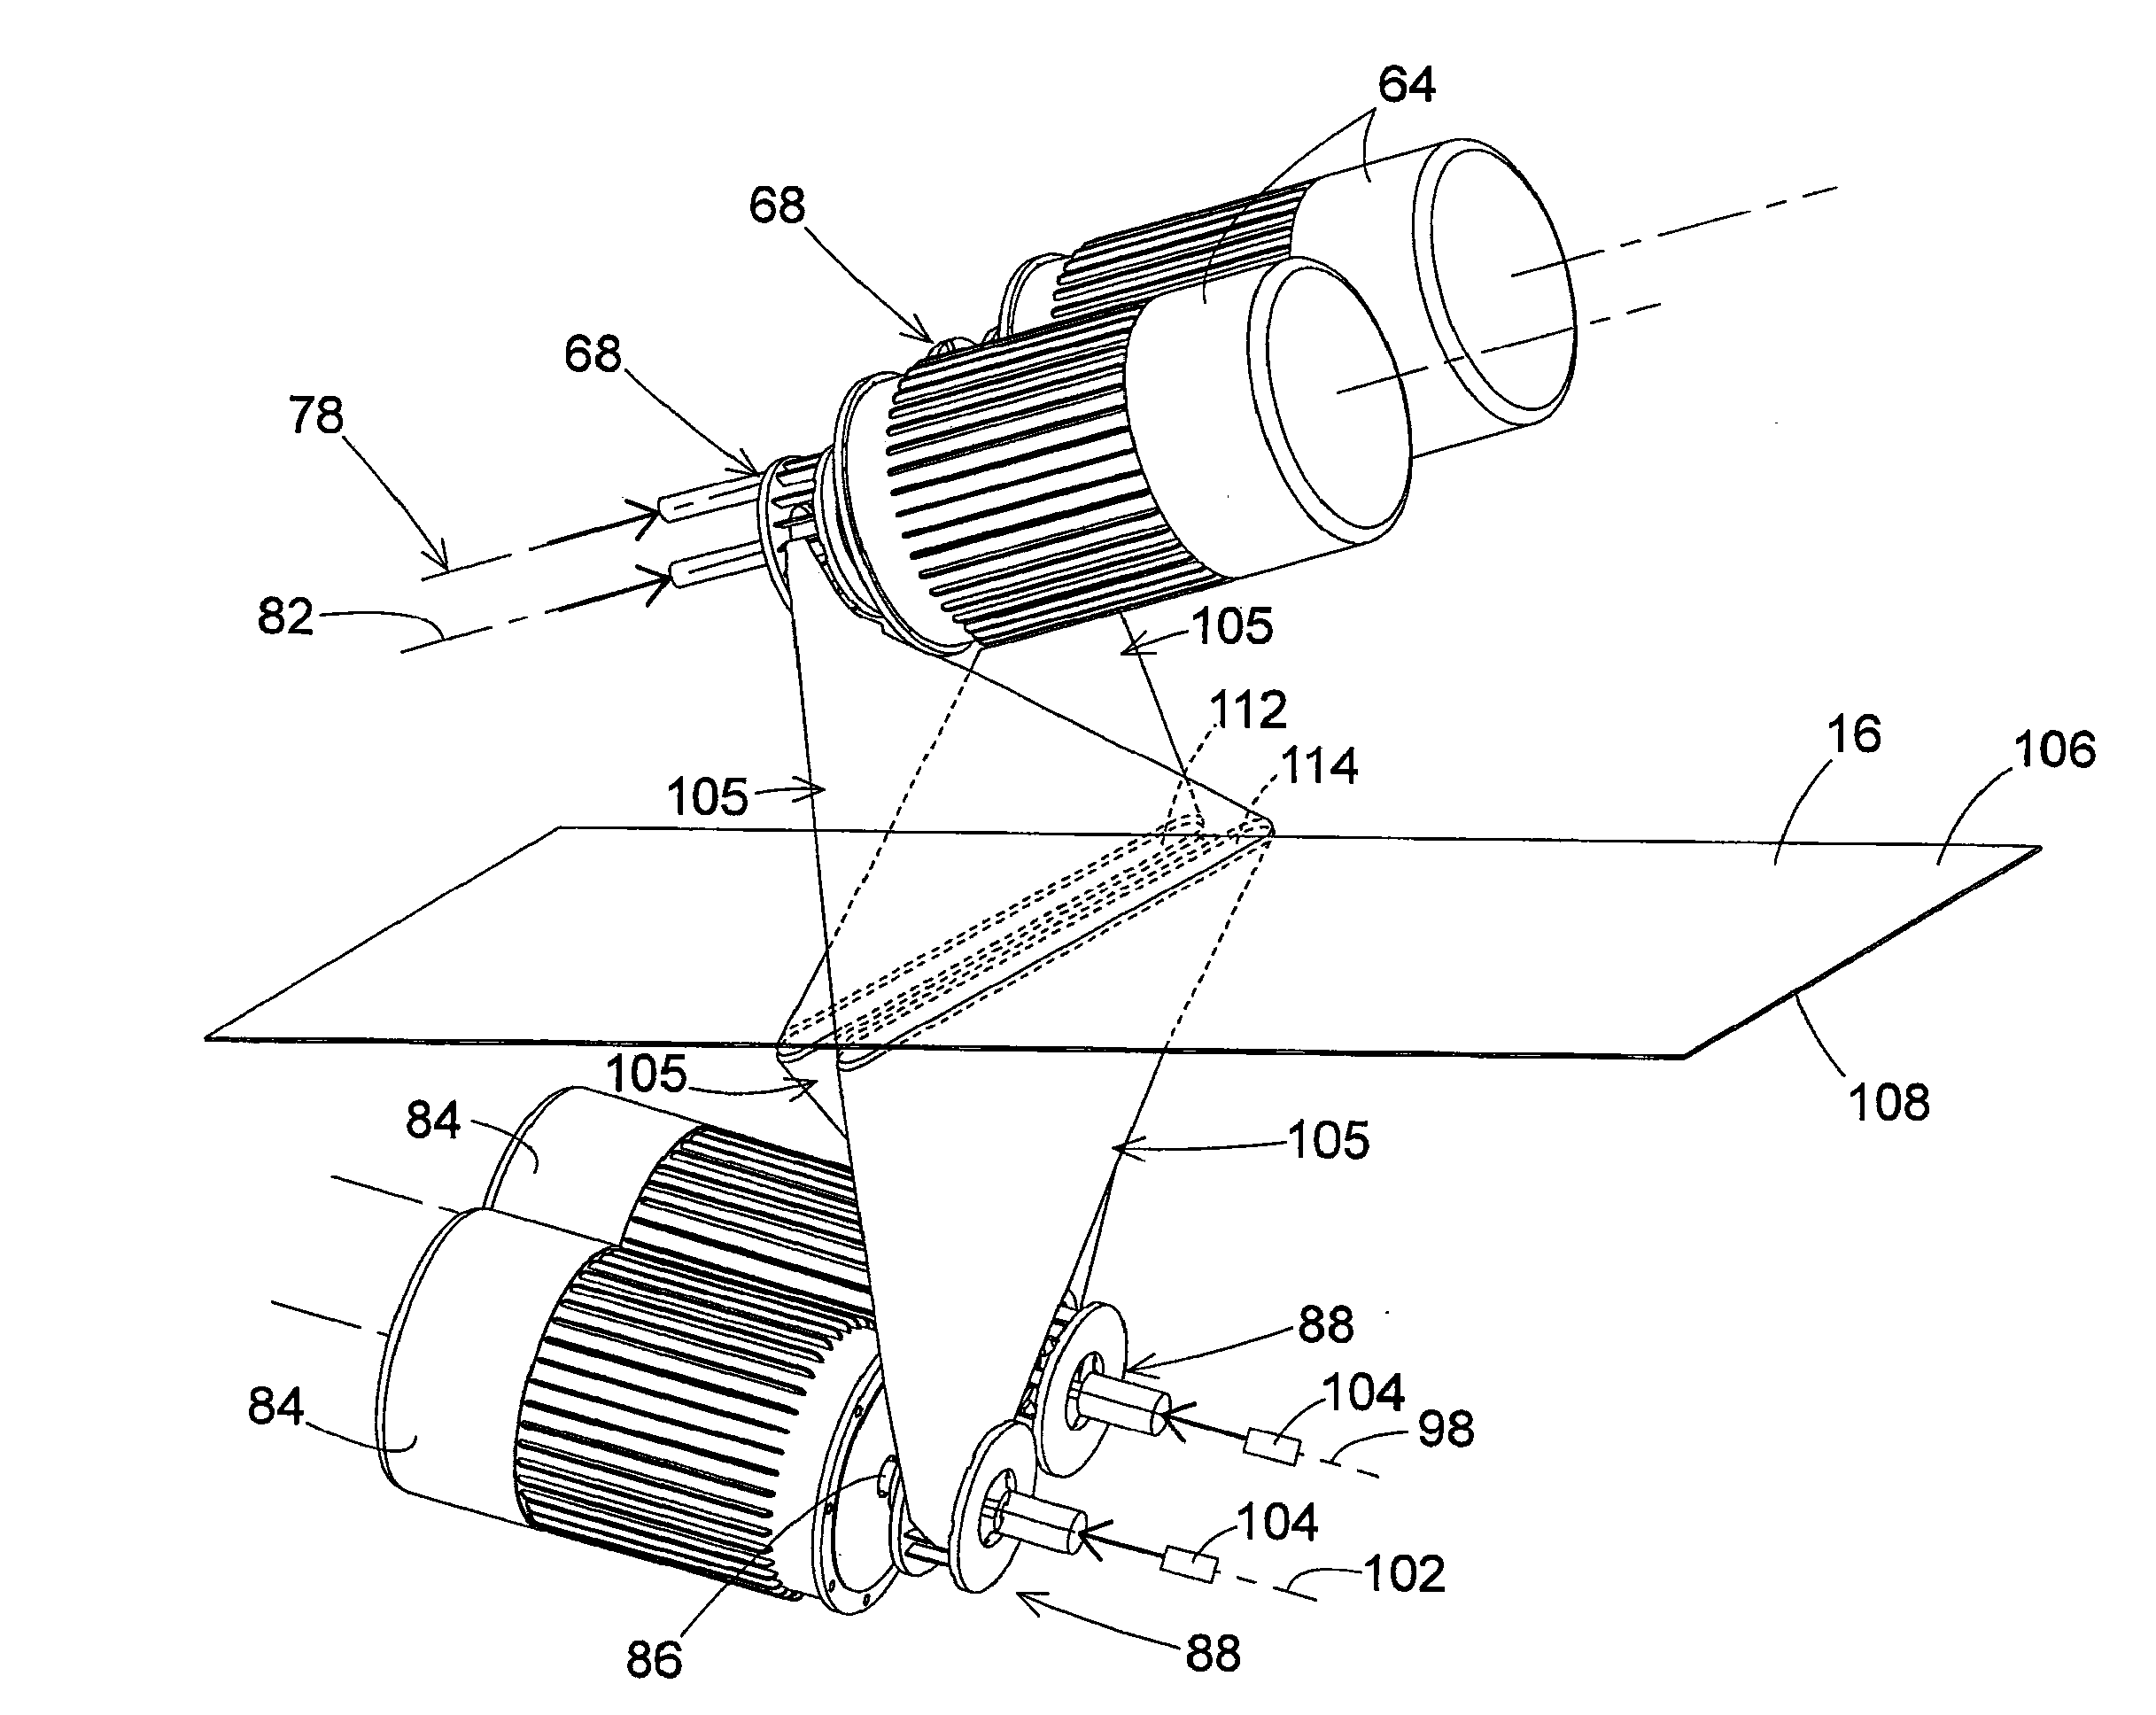 Method of Producing Rust Inhibitive Sheet Metal Through Scale Removal with a Slurry Blasting Descaling Cell Having Improved Grit Flow